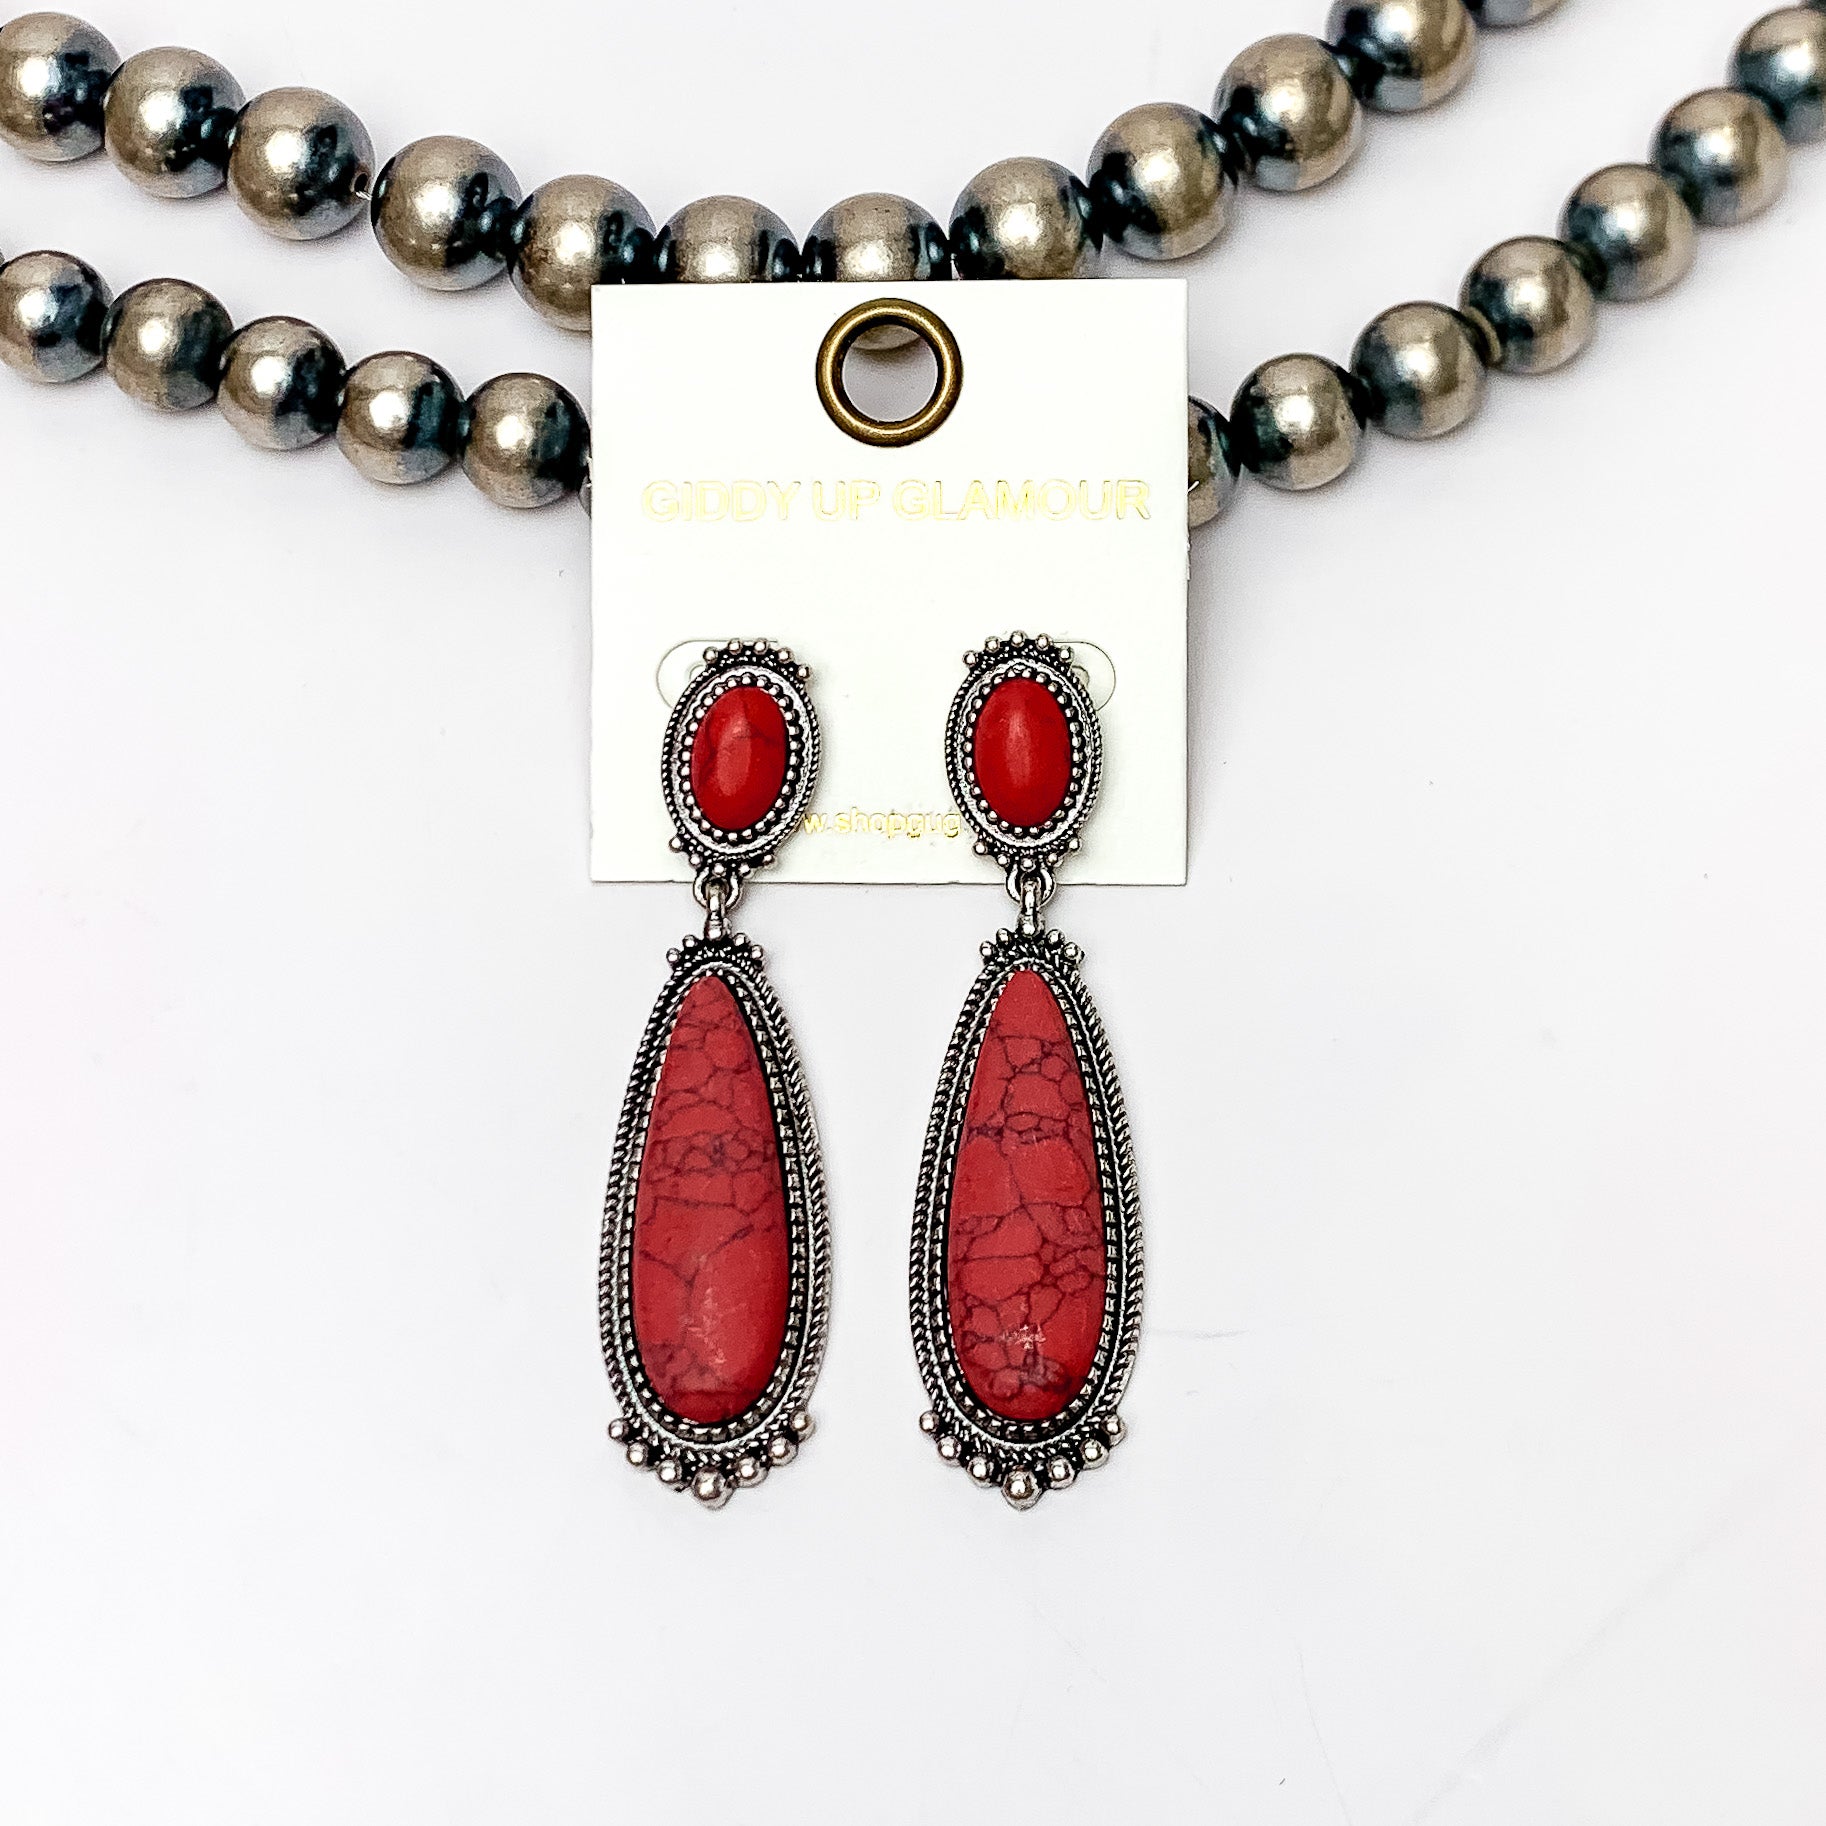 Southern Saturdays Silver Tone Drop Earrings in Red. These earrings featured two large stones. The background of the picture is white and the earrings are laying against Navajo pearls.